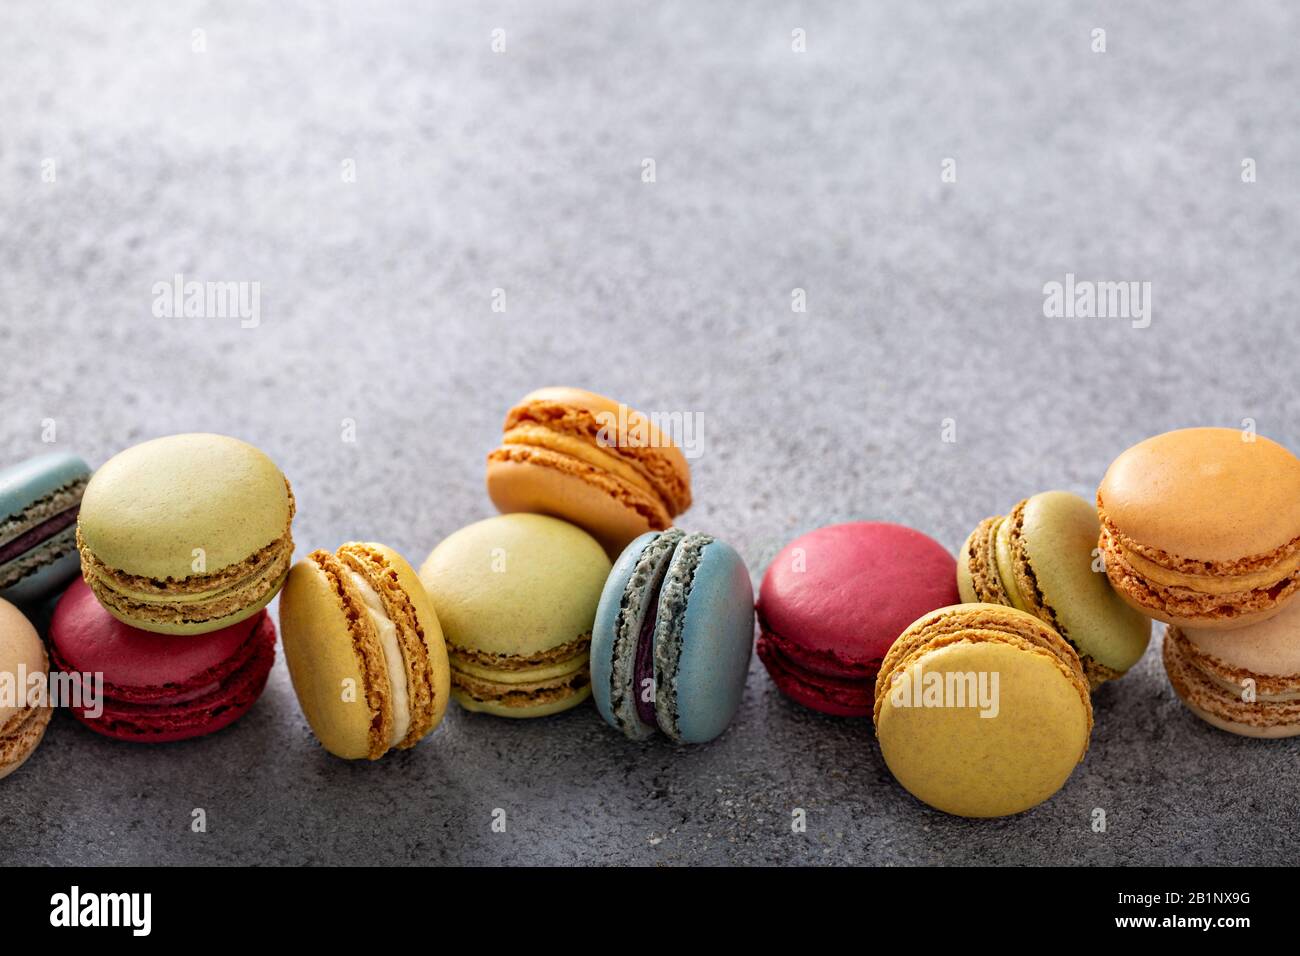 Variety of colorful macarons on the table Stock Photo